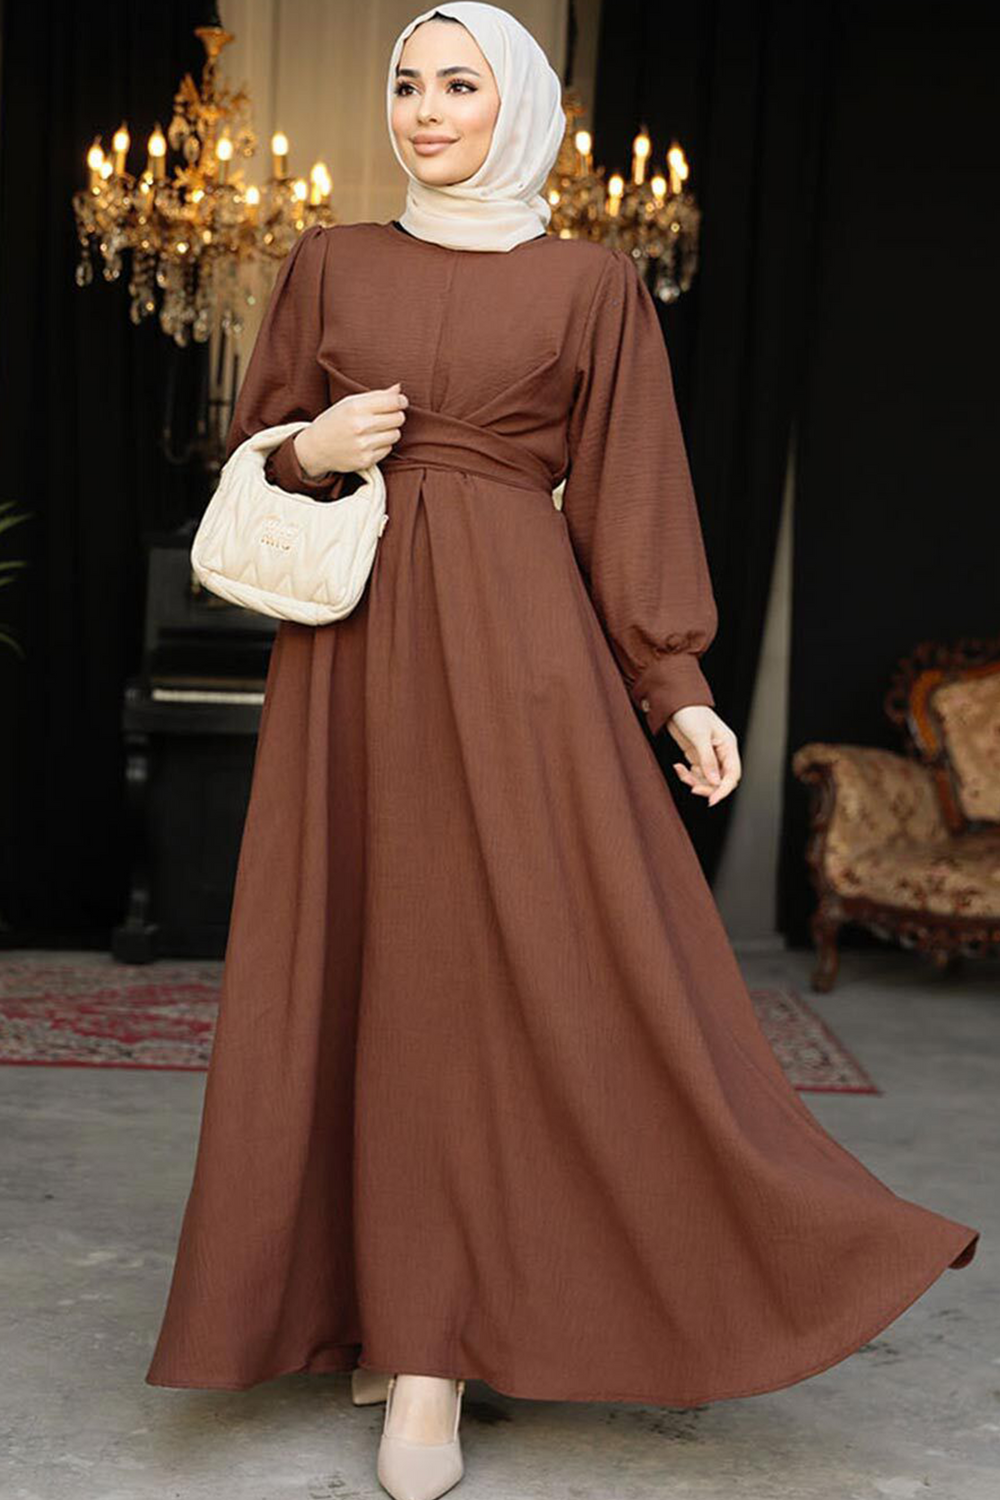 a woman wearing a brown dress and a white purse